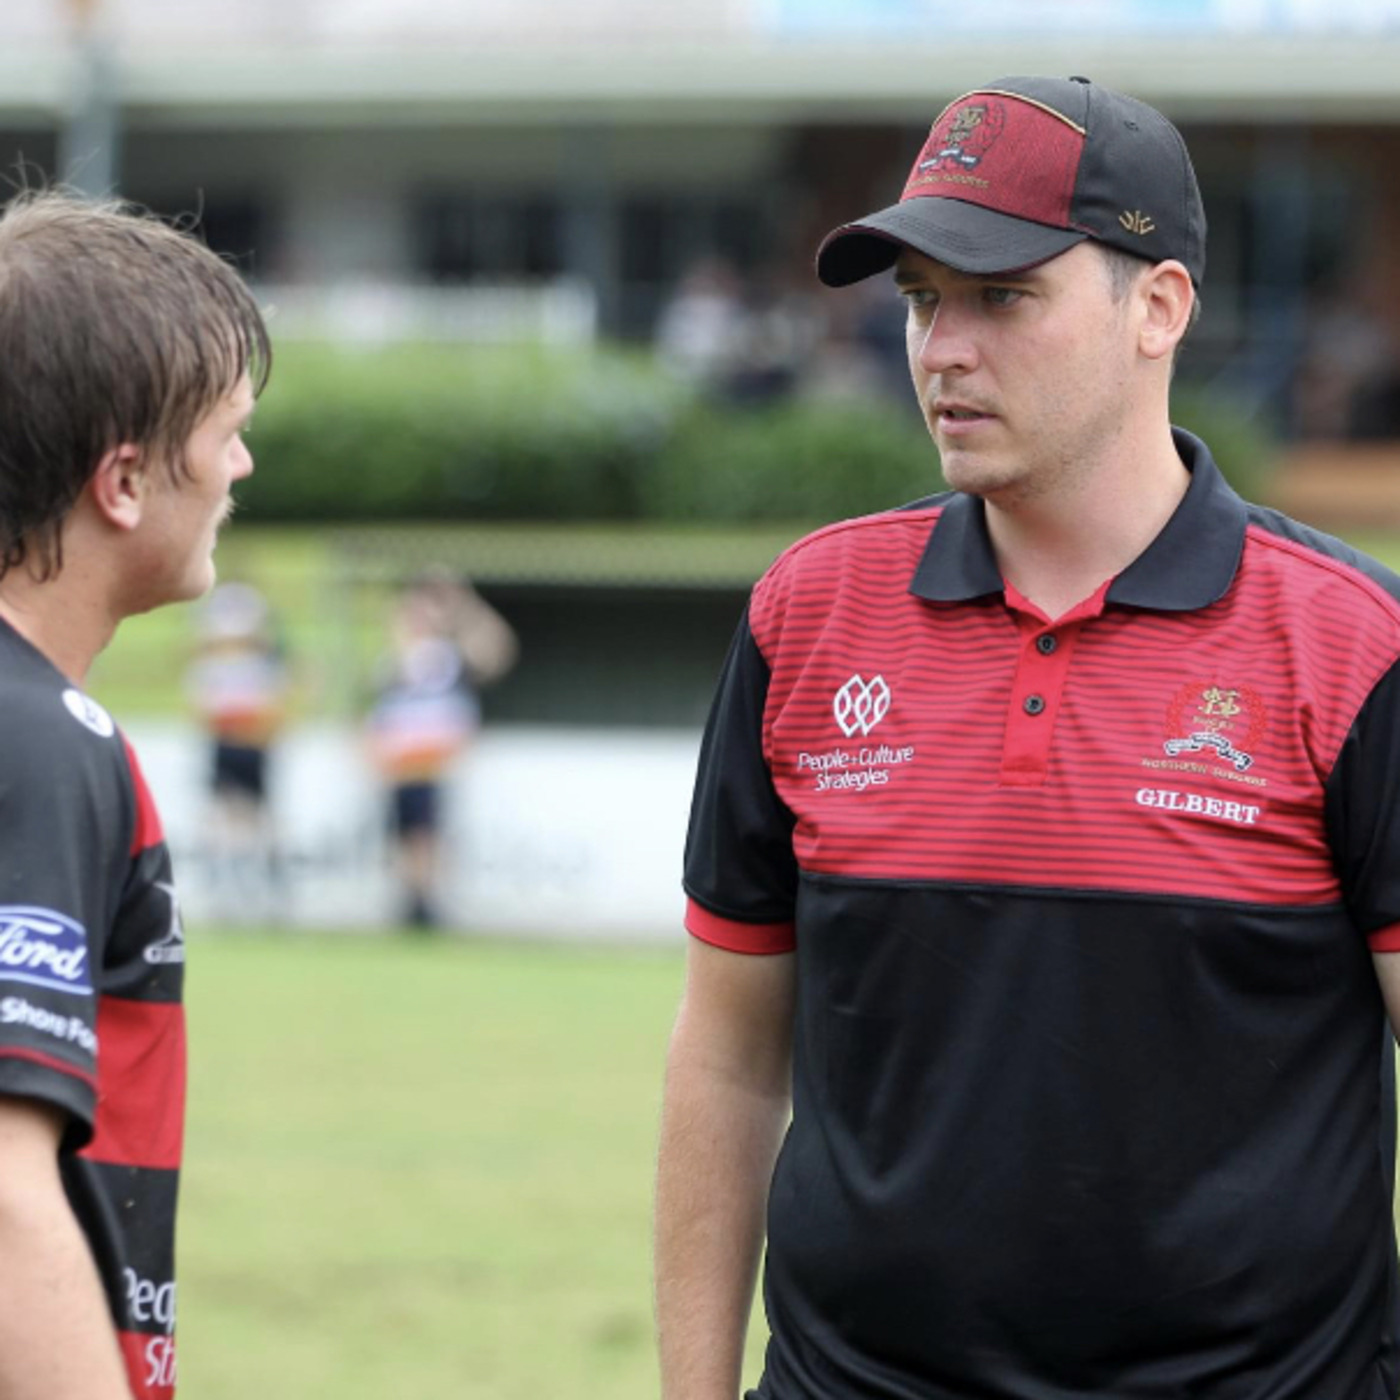 Episode 106: Andrew Brownhill, Ep. 106, Academy Coaching in the Shute Shield